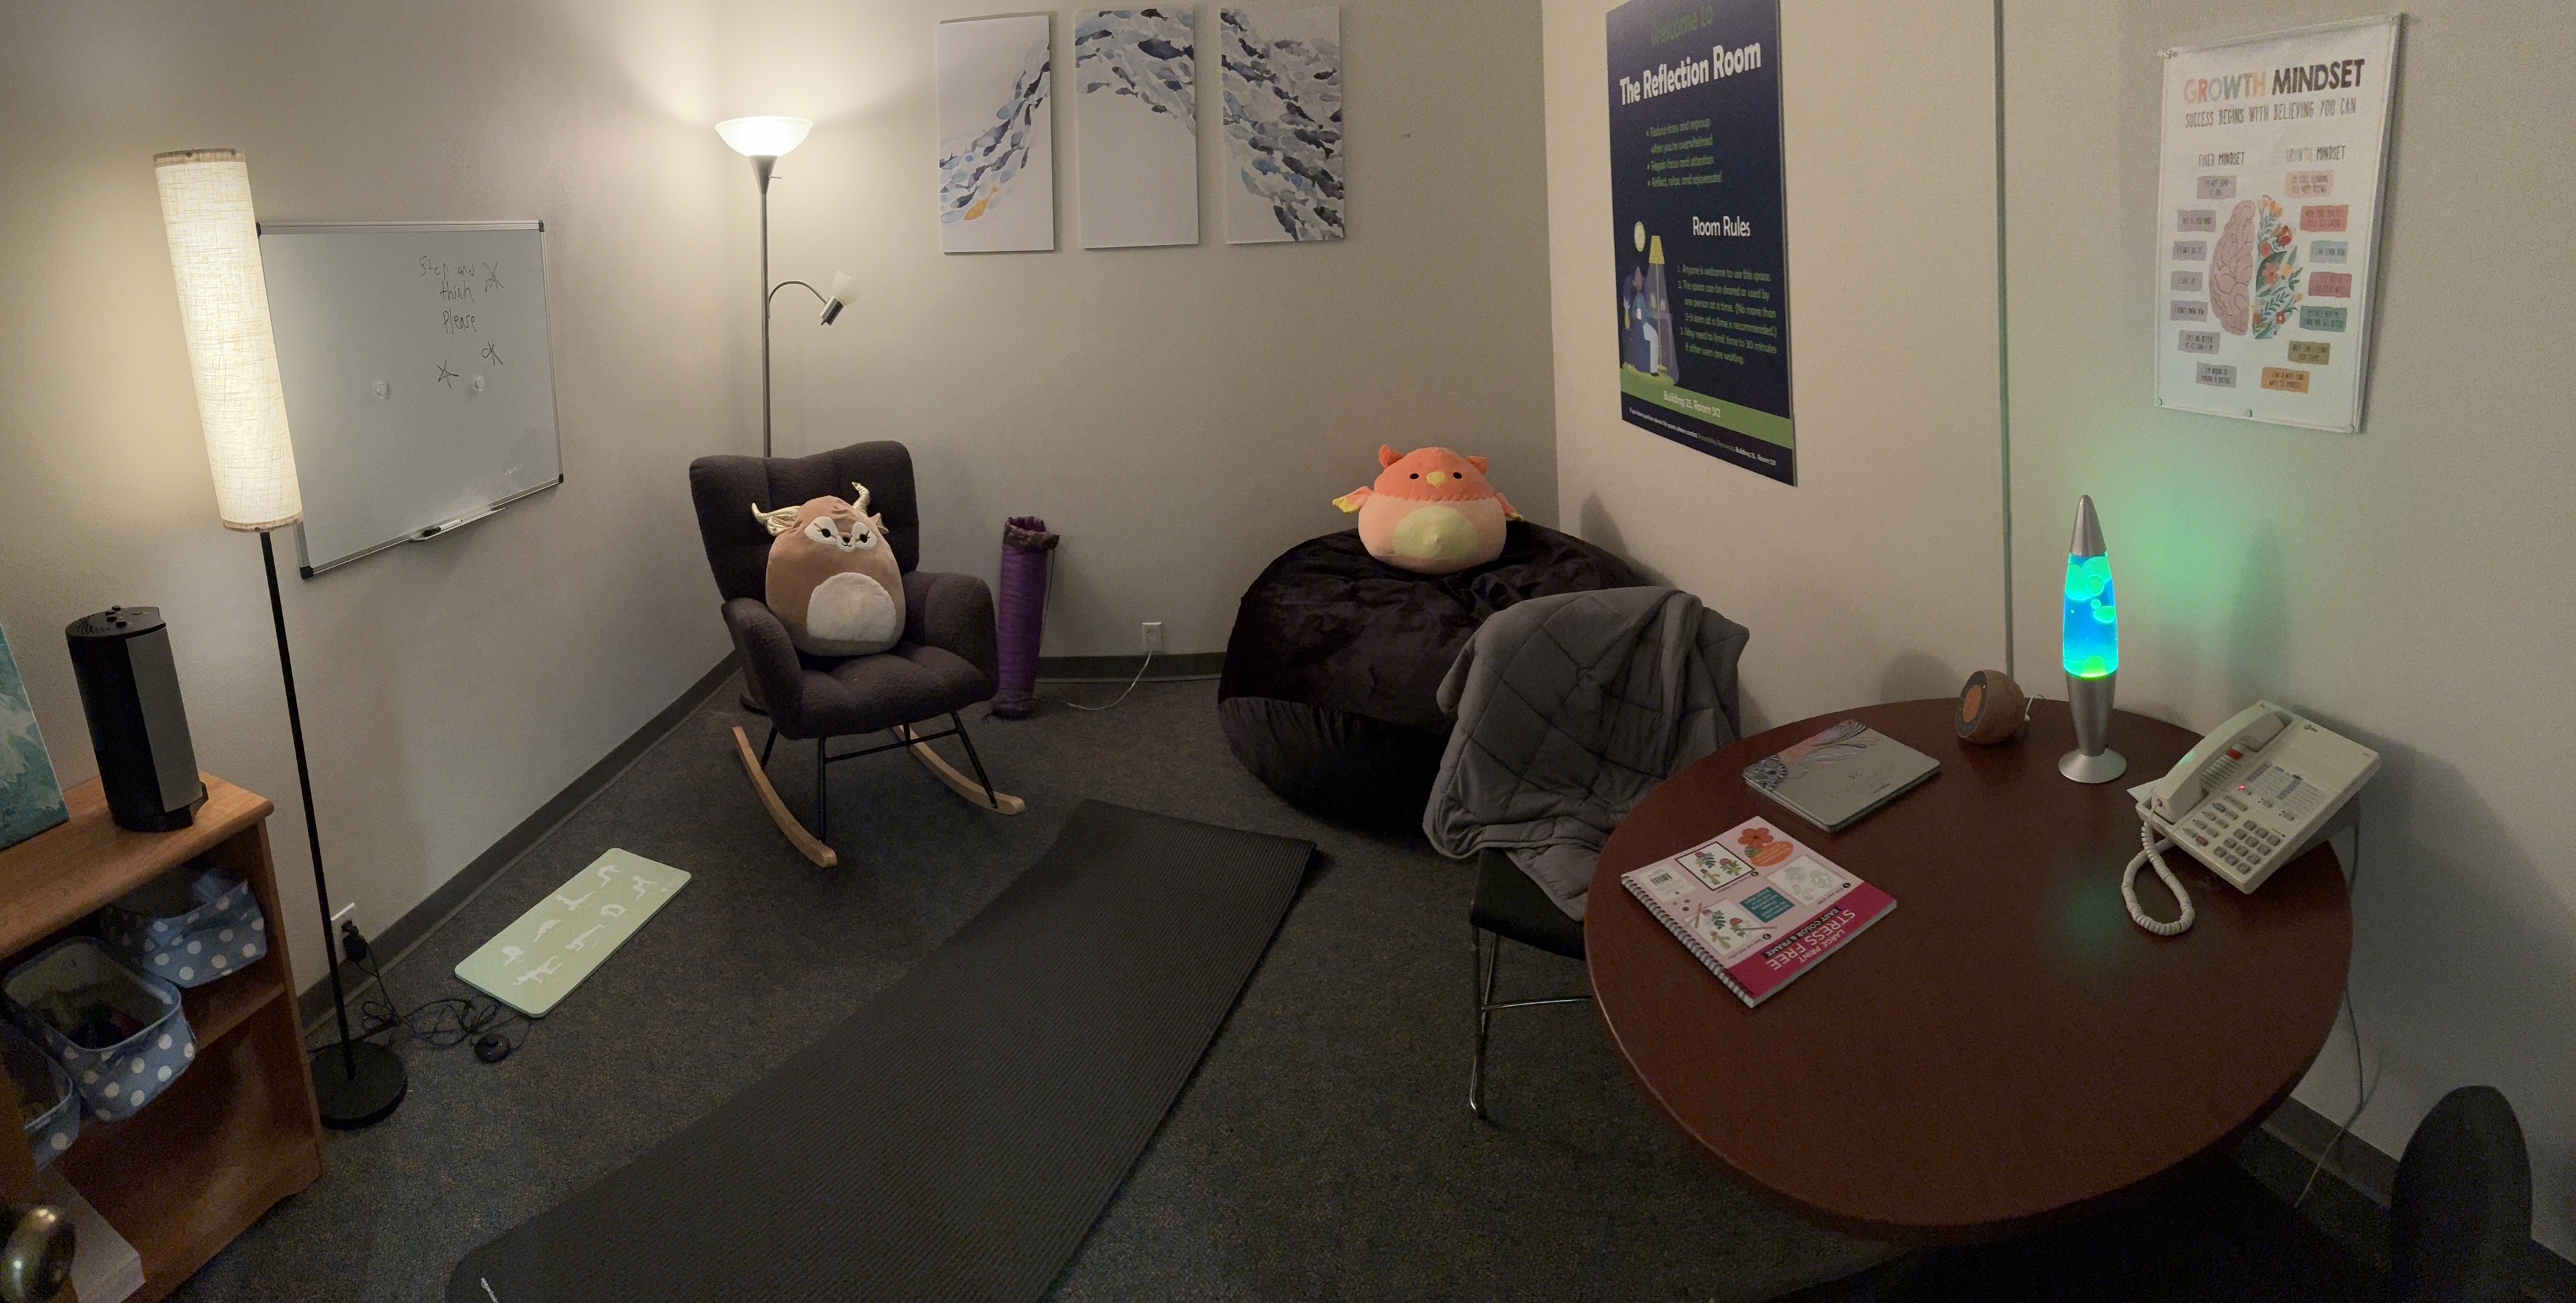 A wide shot of the reflection room, with soft lighting, yoga mats on the floor, a comfy rocking chair and beanbag with stuffed animals, a table with coloring books and lava lamp, and posters and artwork on the walls.